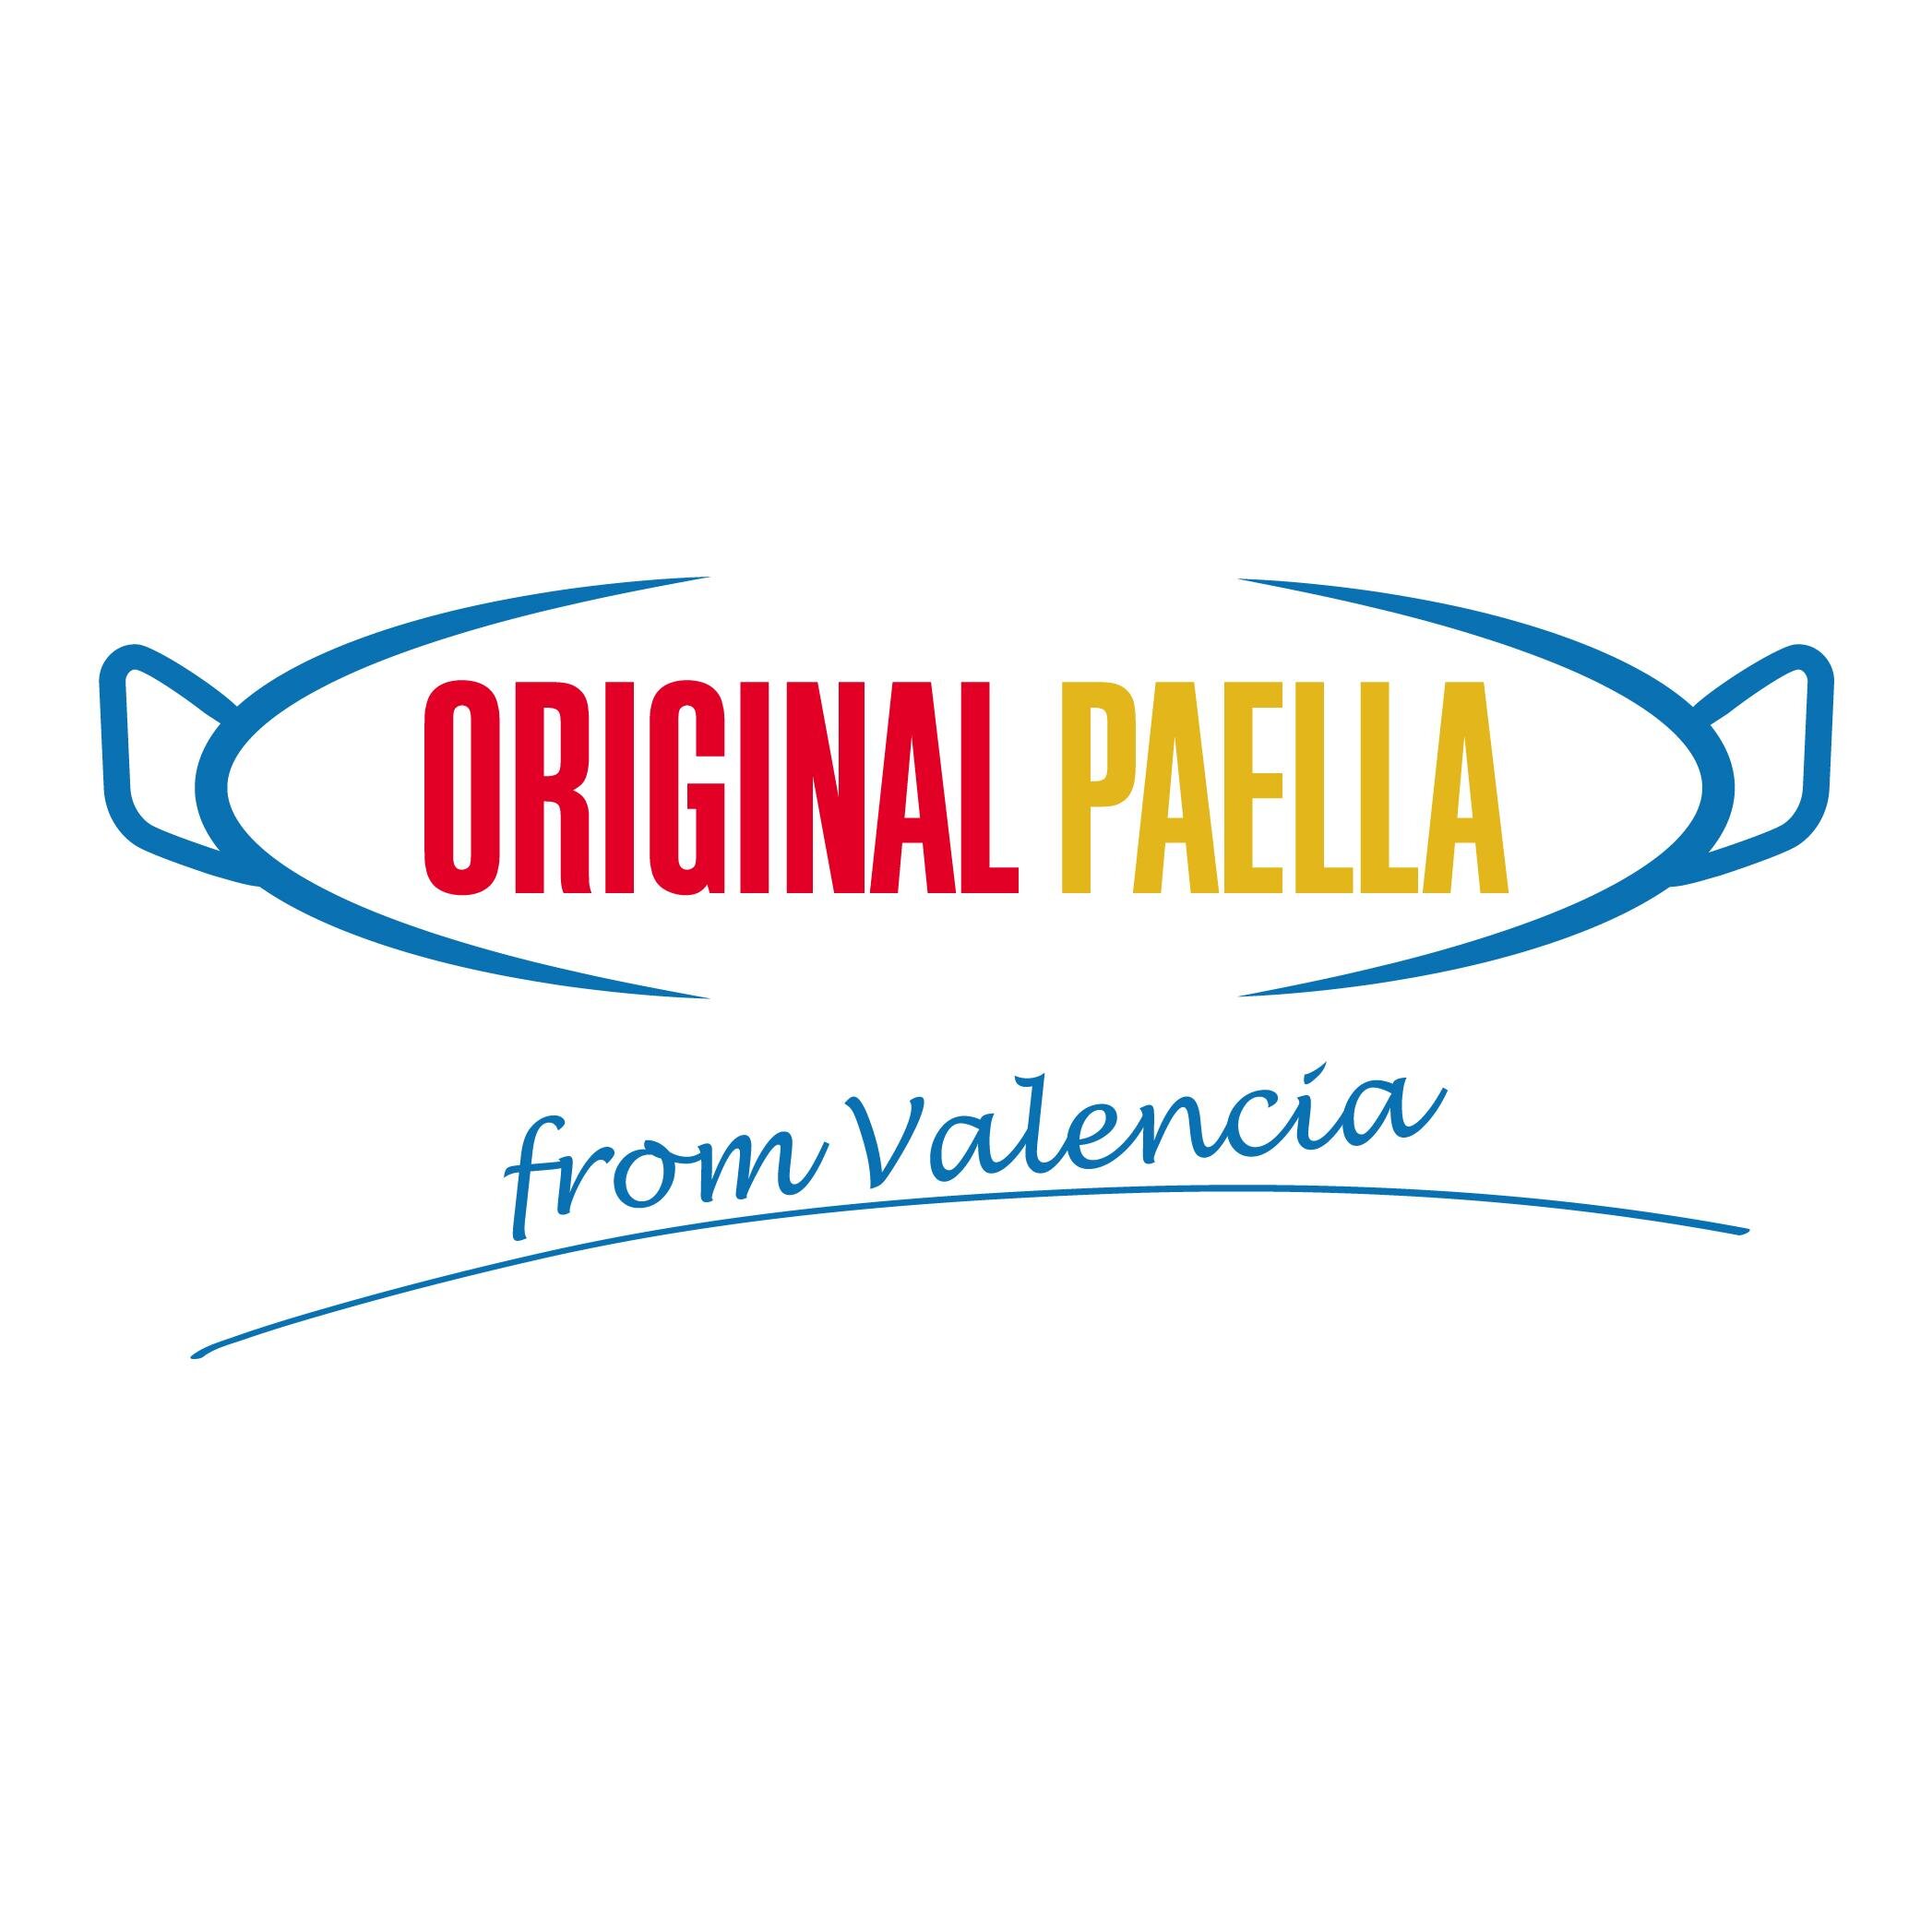 Everything You Always Wanted to Know About Original #PAELLA